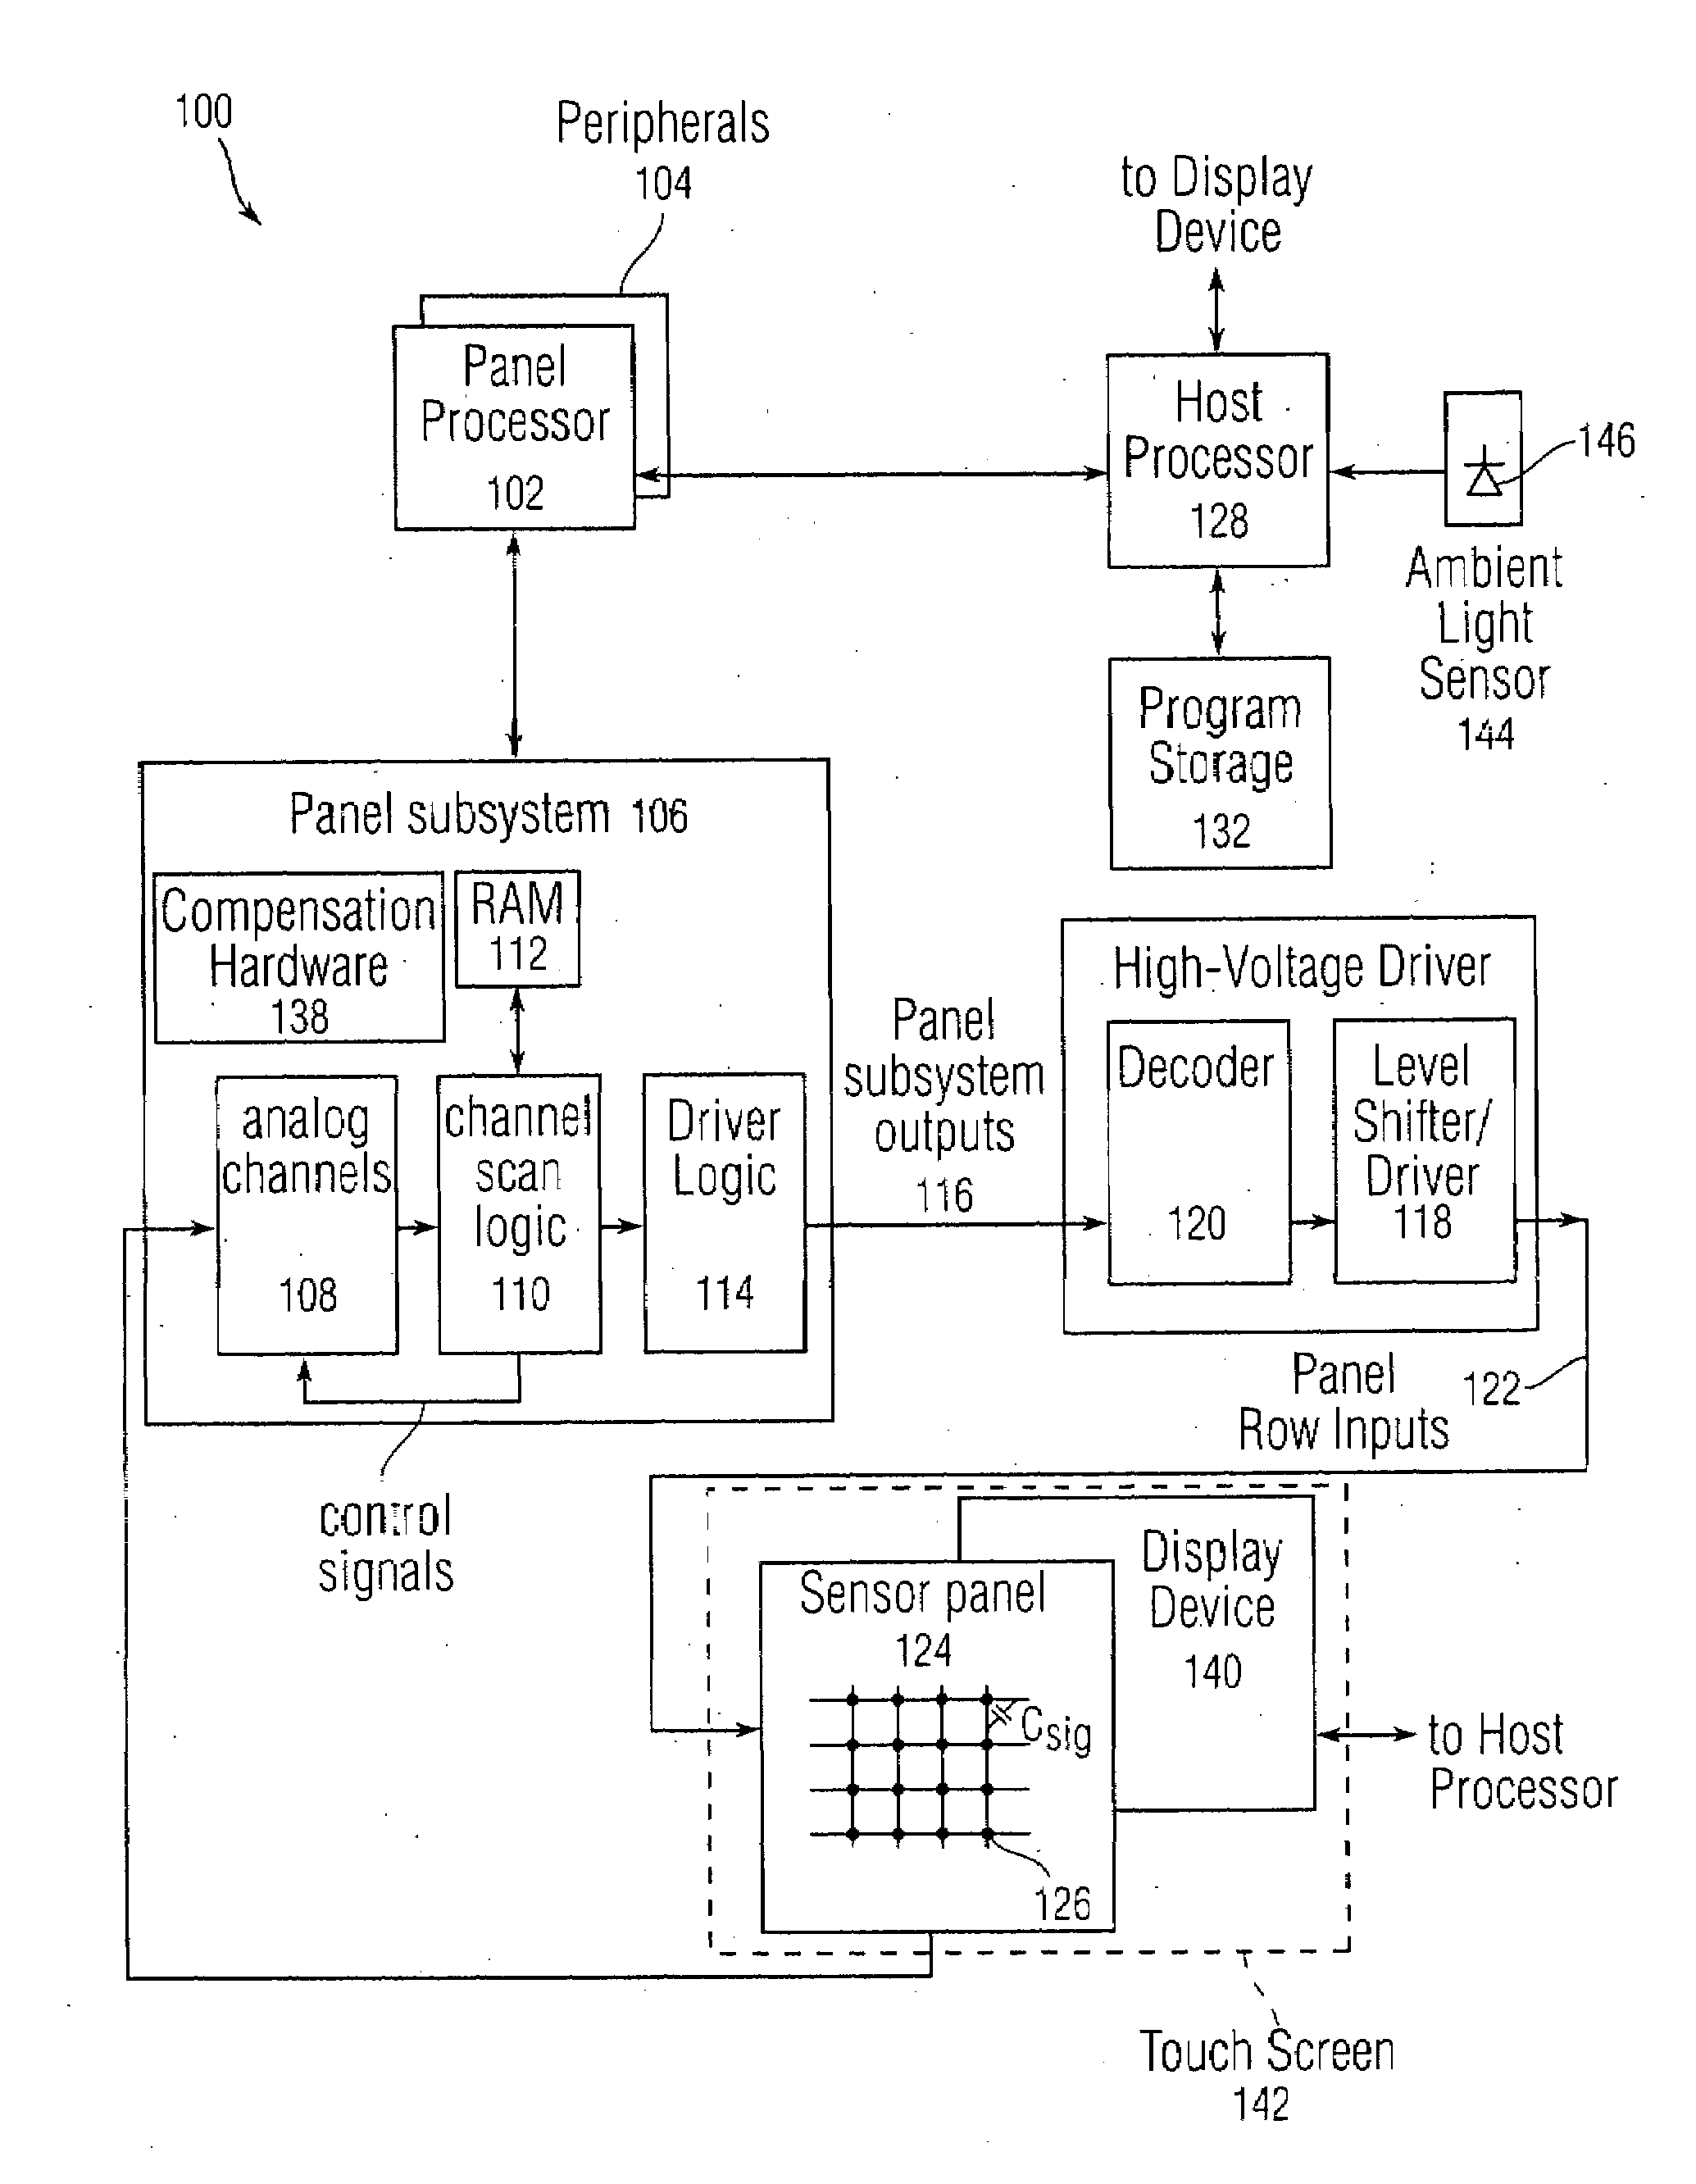 Luminescence shock avoidance in display devices